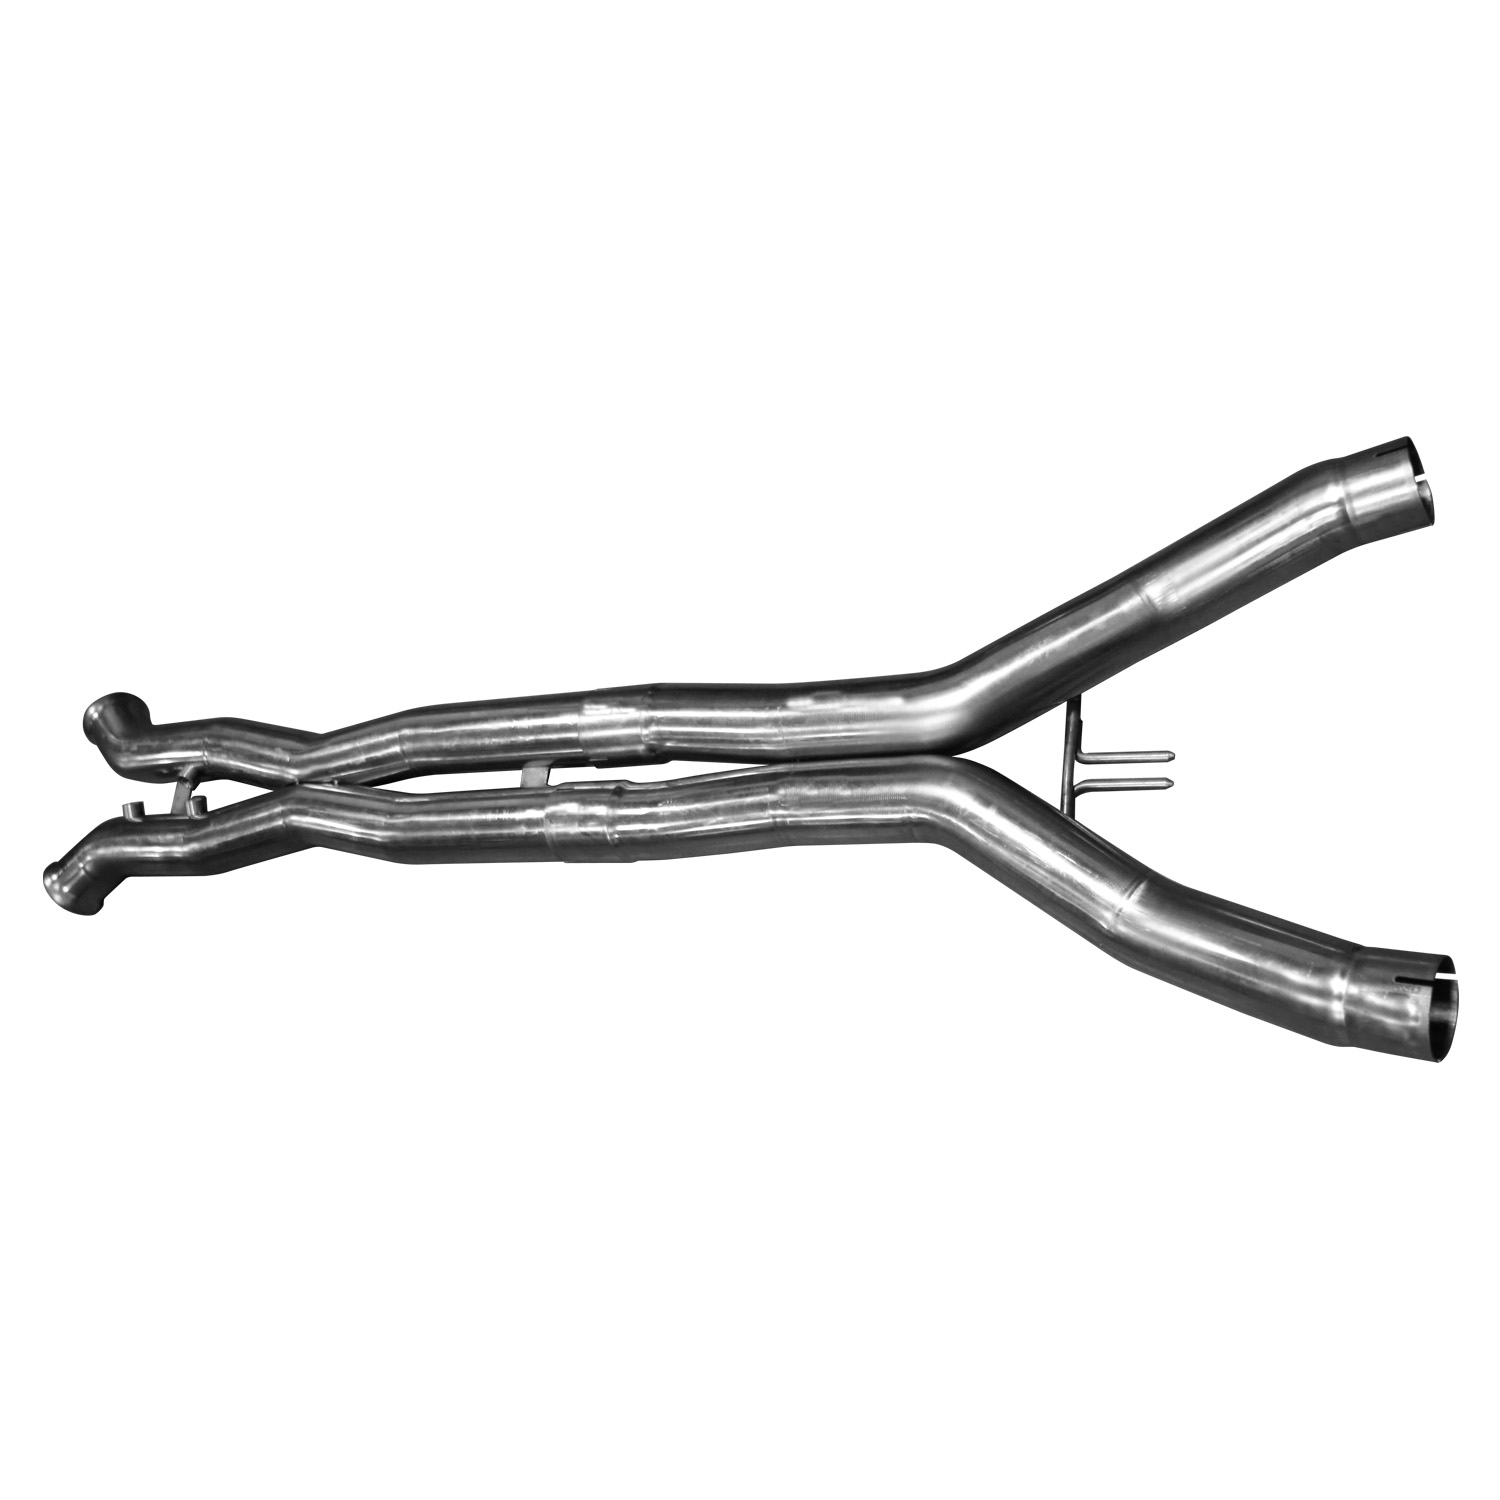 Off Road X-Pipe 3 x 3" Connects to 2.75" OEM Style Exhaust Incl. 3 x 2.75" Mid Pipes 2014-Present Corvette C7 LT1 6.2L 2015-Pres